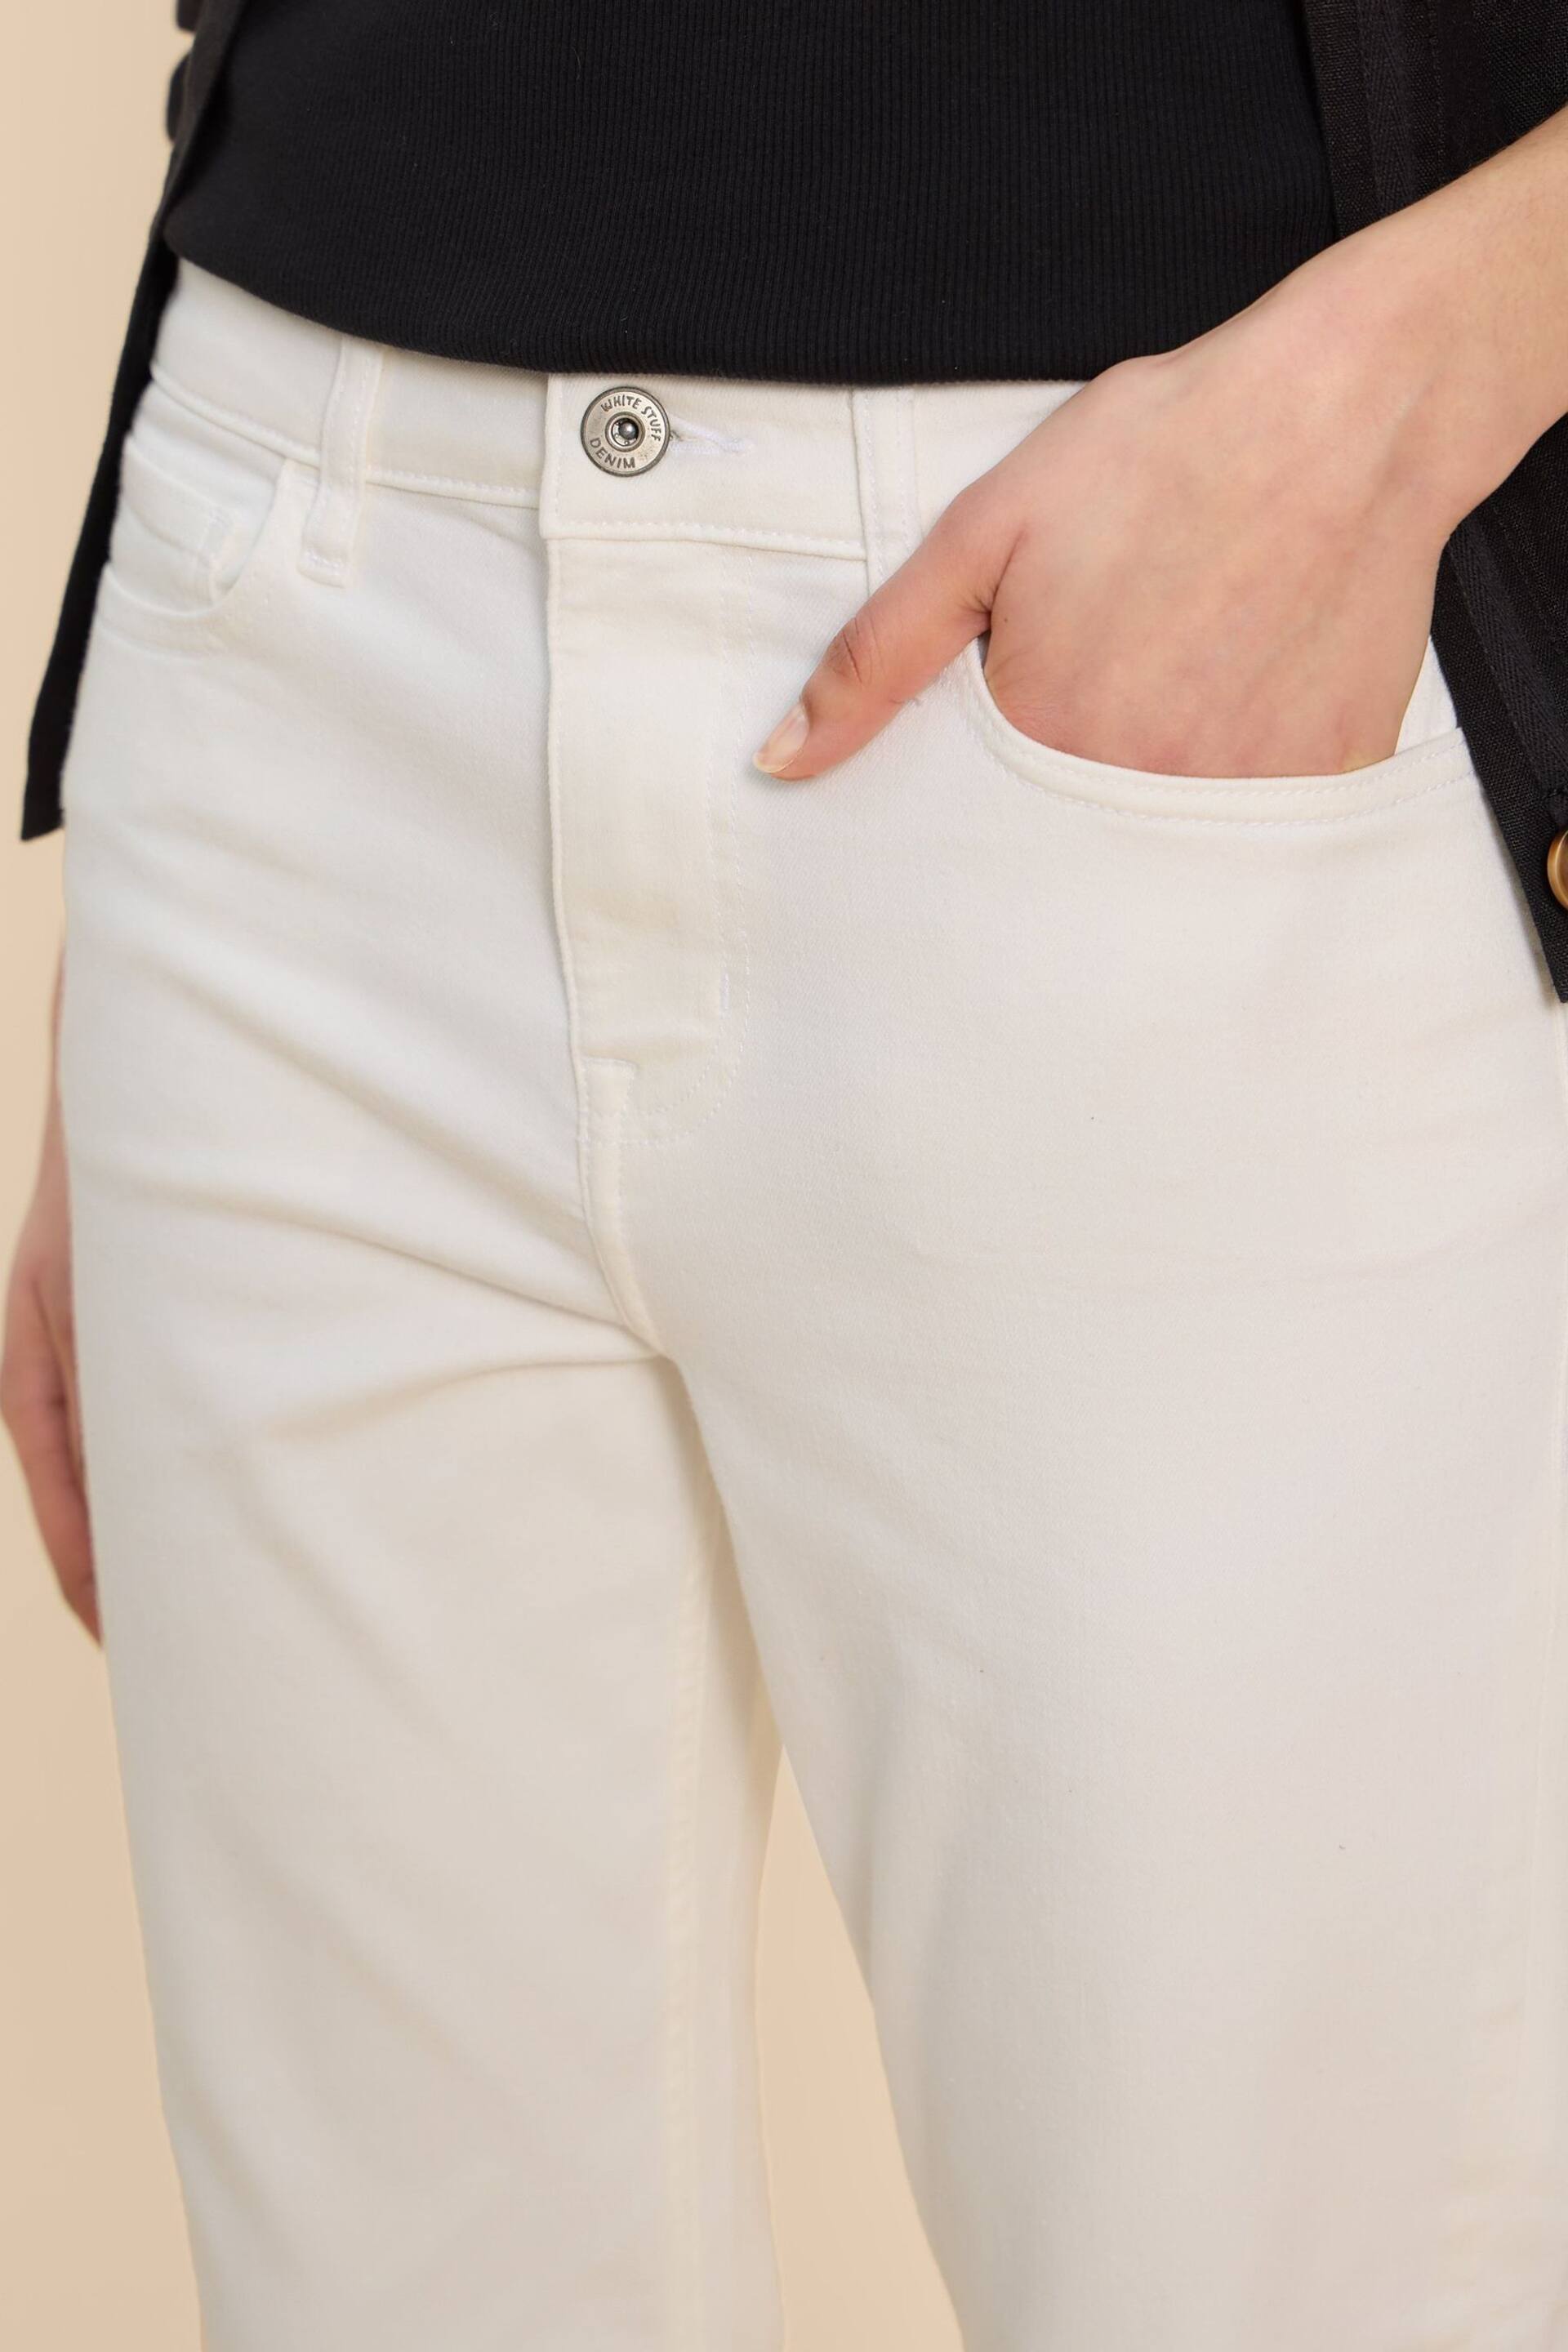 White Stuff Natural Blake Straight Crop Jeans - Image 3 of 7